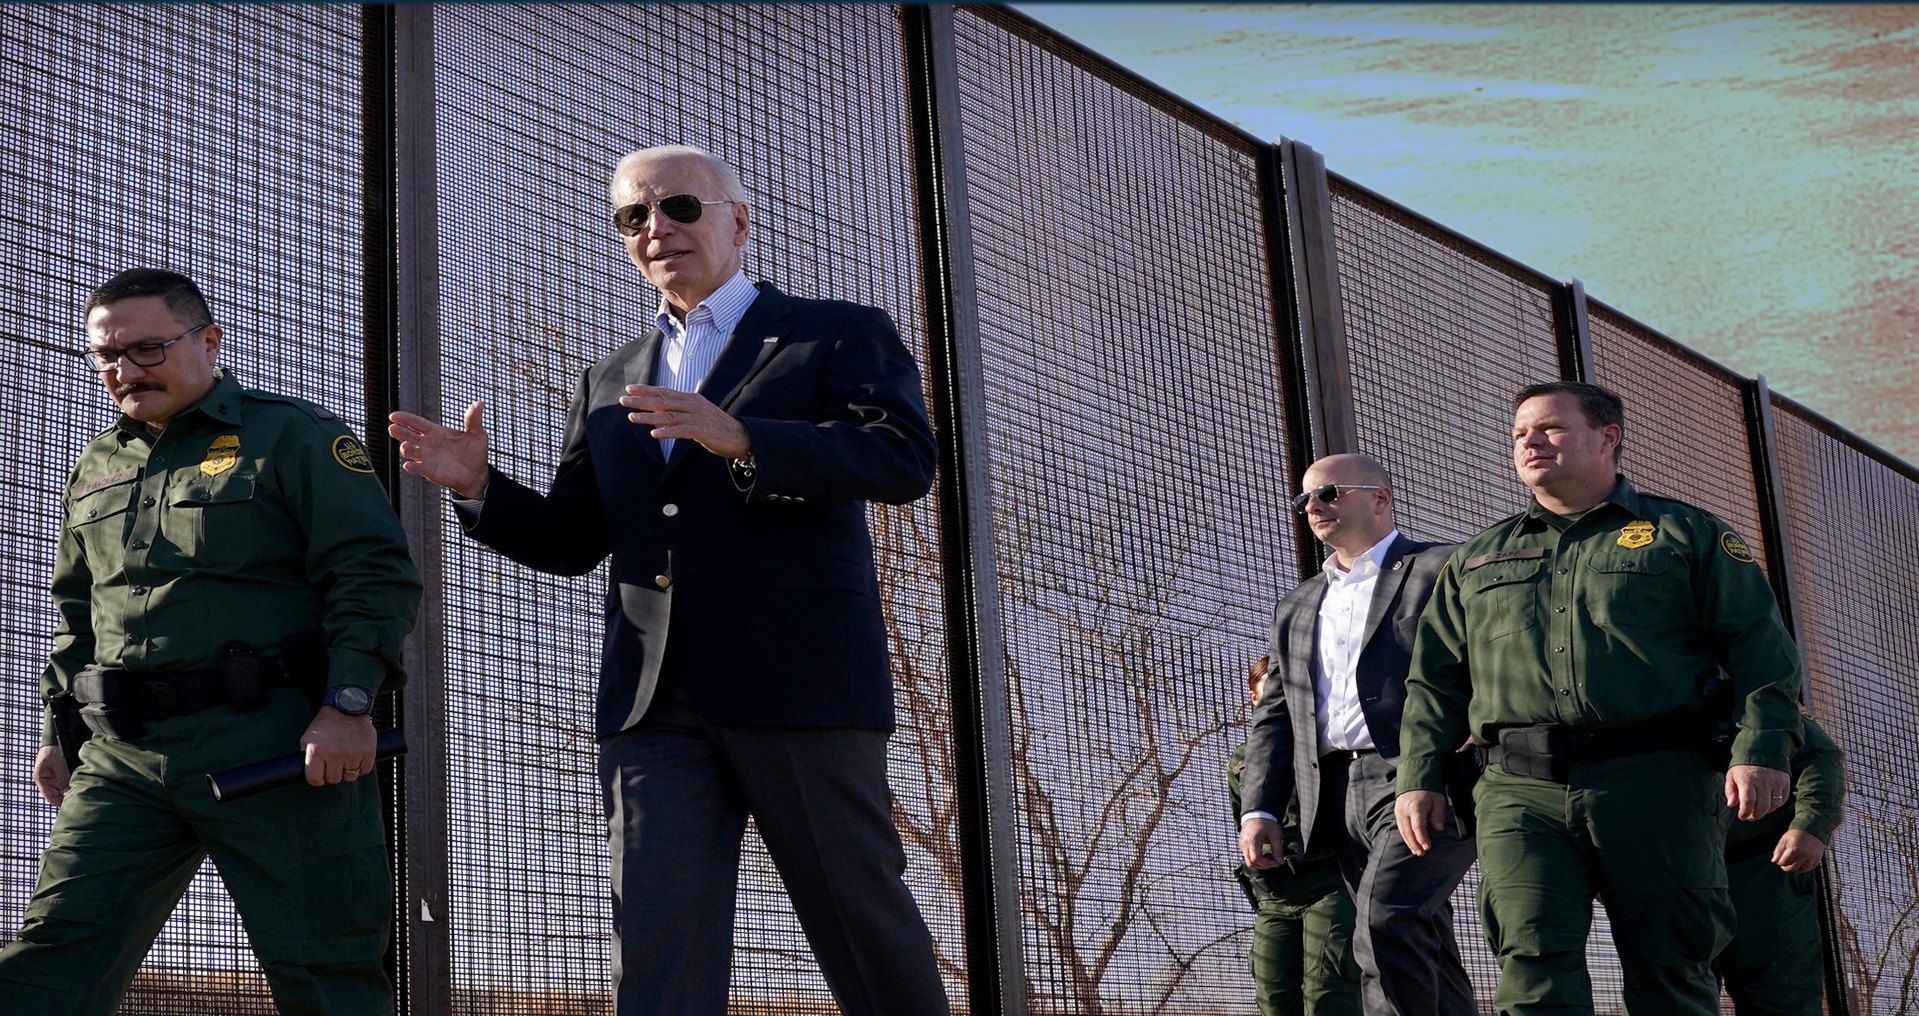 First time since taking office, Biden inspects crisis at US-Mexican border